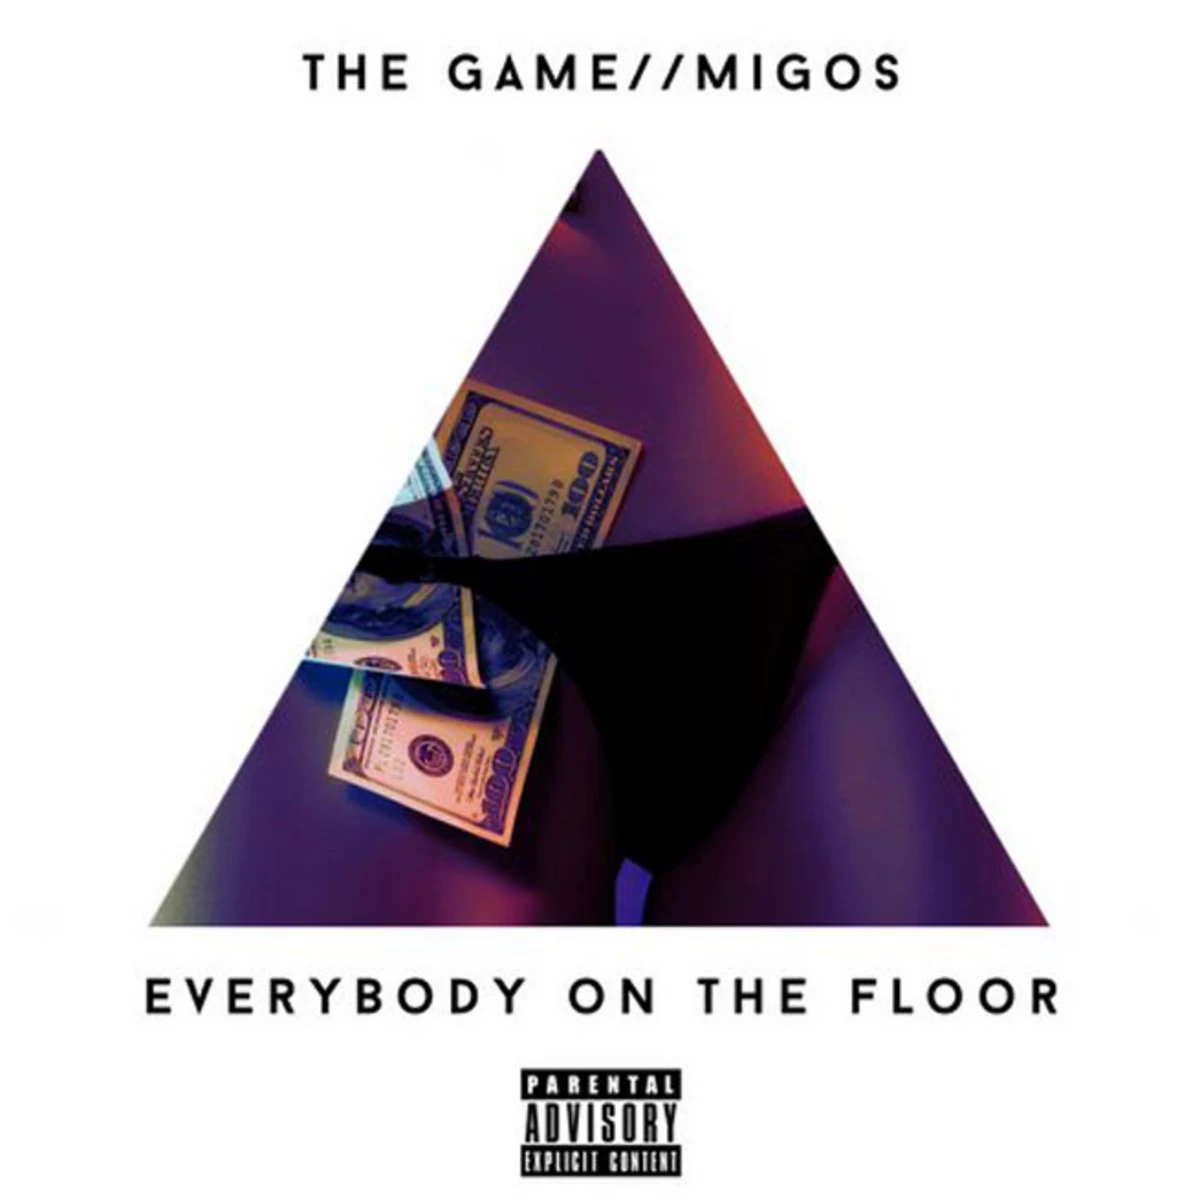 4 to the floor feat. Migos альбом. Get up on the Floor текст. On the Floor перевод.